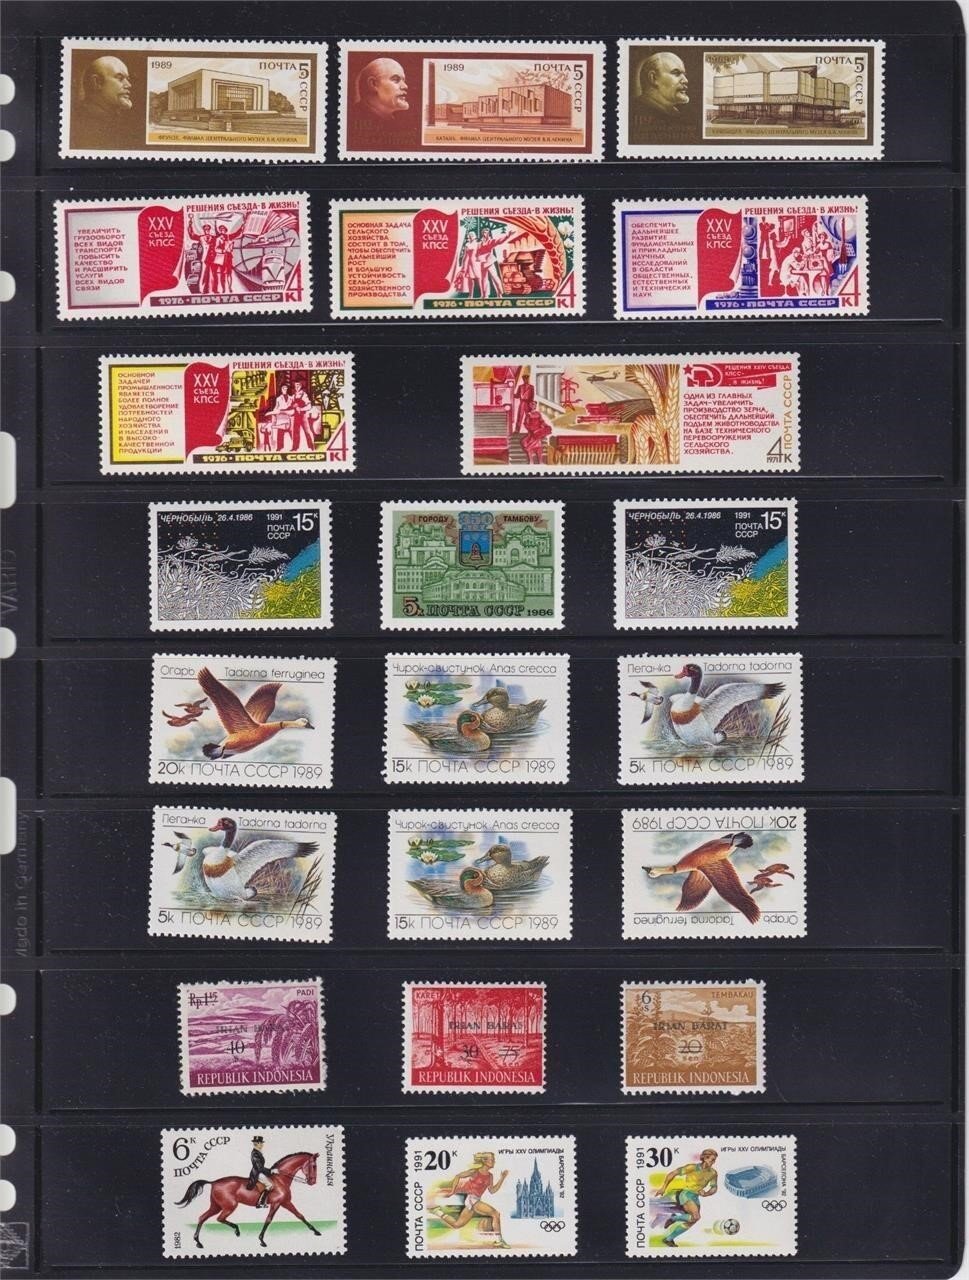 Mixed Lot 500+ World Postage Stamps #2